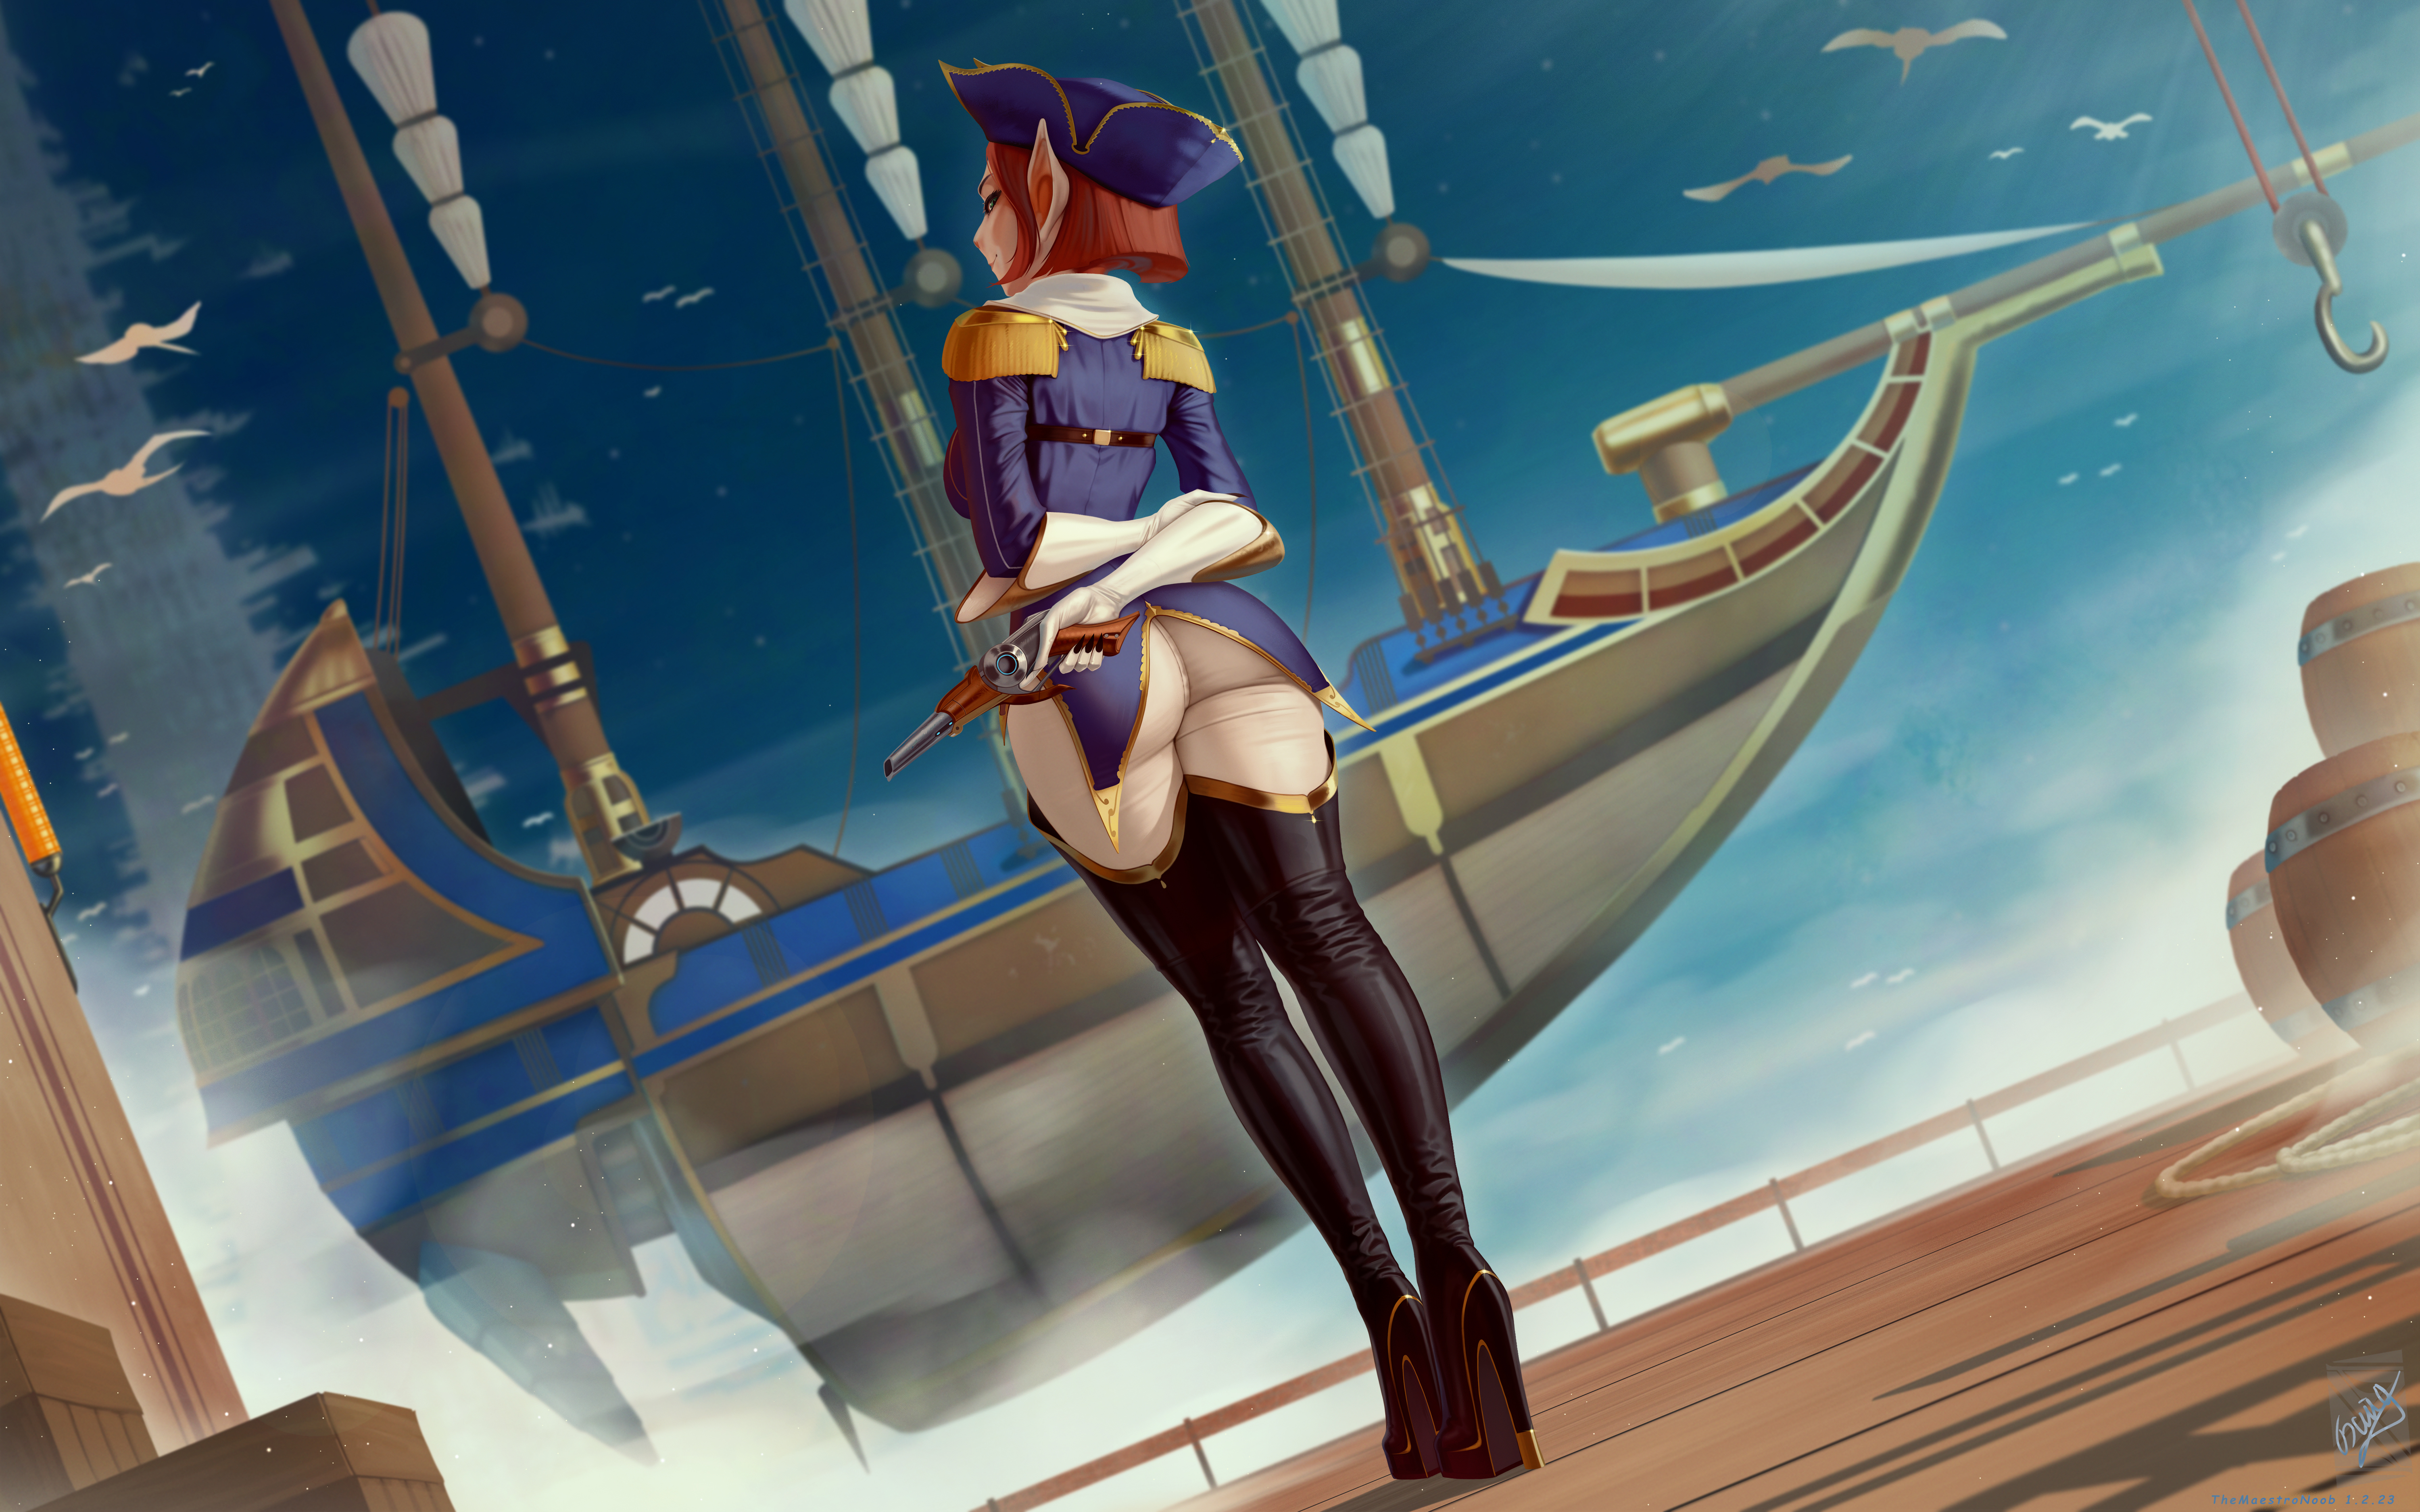 General 6000x3750 Captain Amelia Treasure Planet Disney fantasy girl fictional character 2D artwork drawing fan art TheMaestroNoob ship thigh high boots pirate hat digital art watermarked